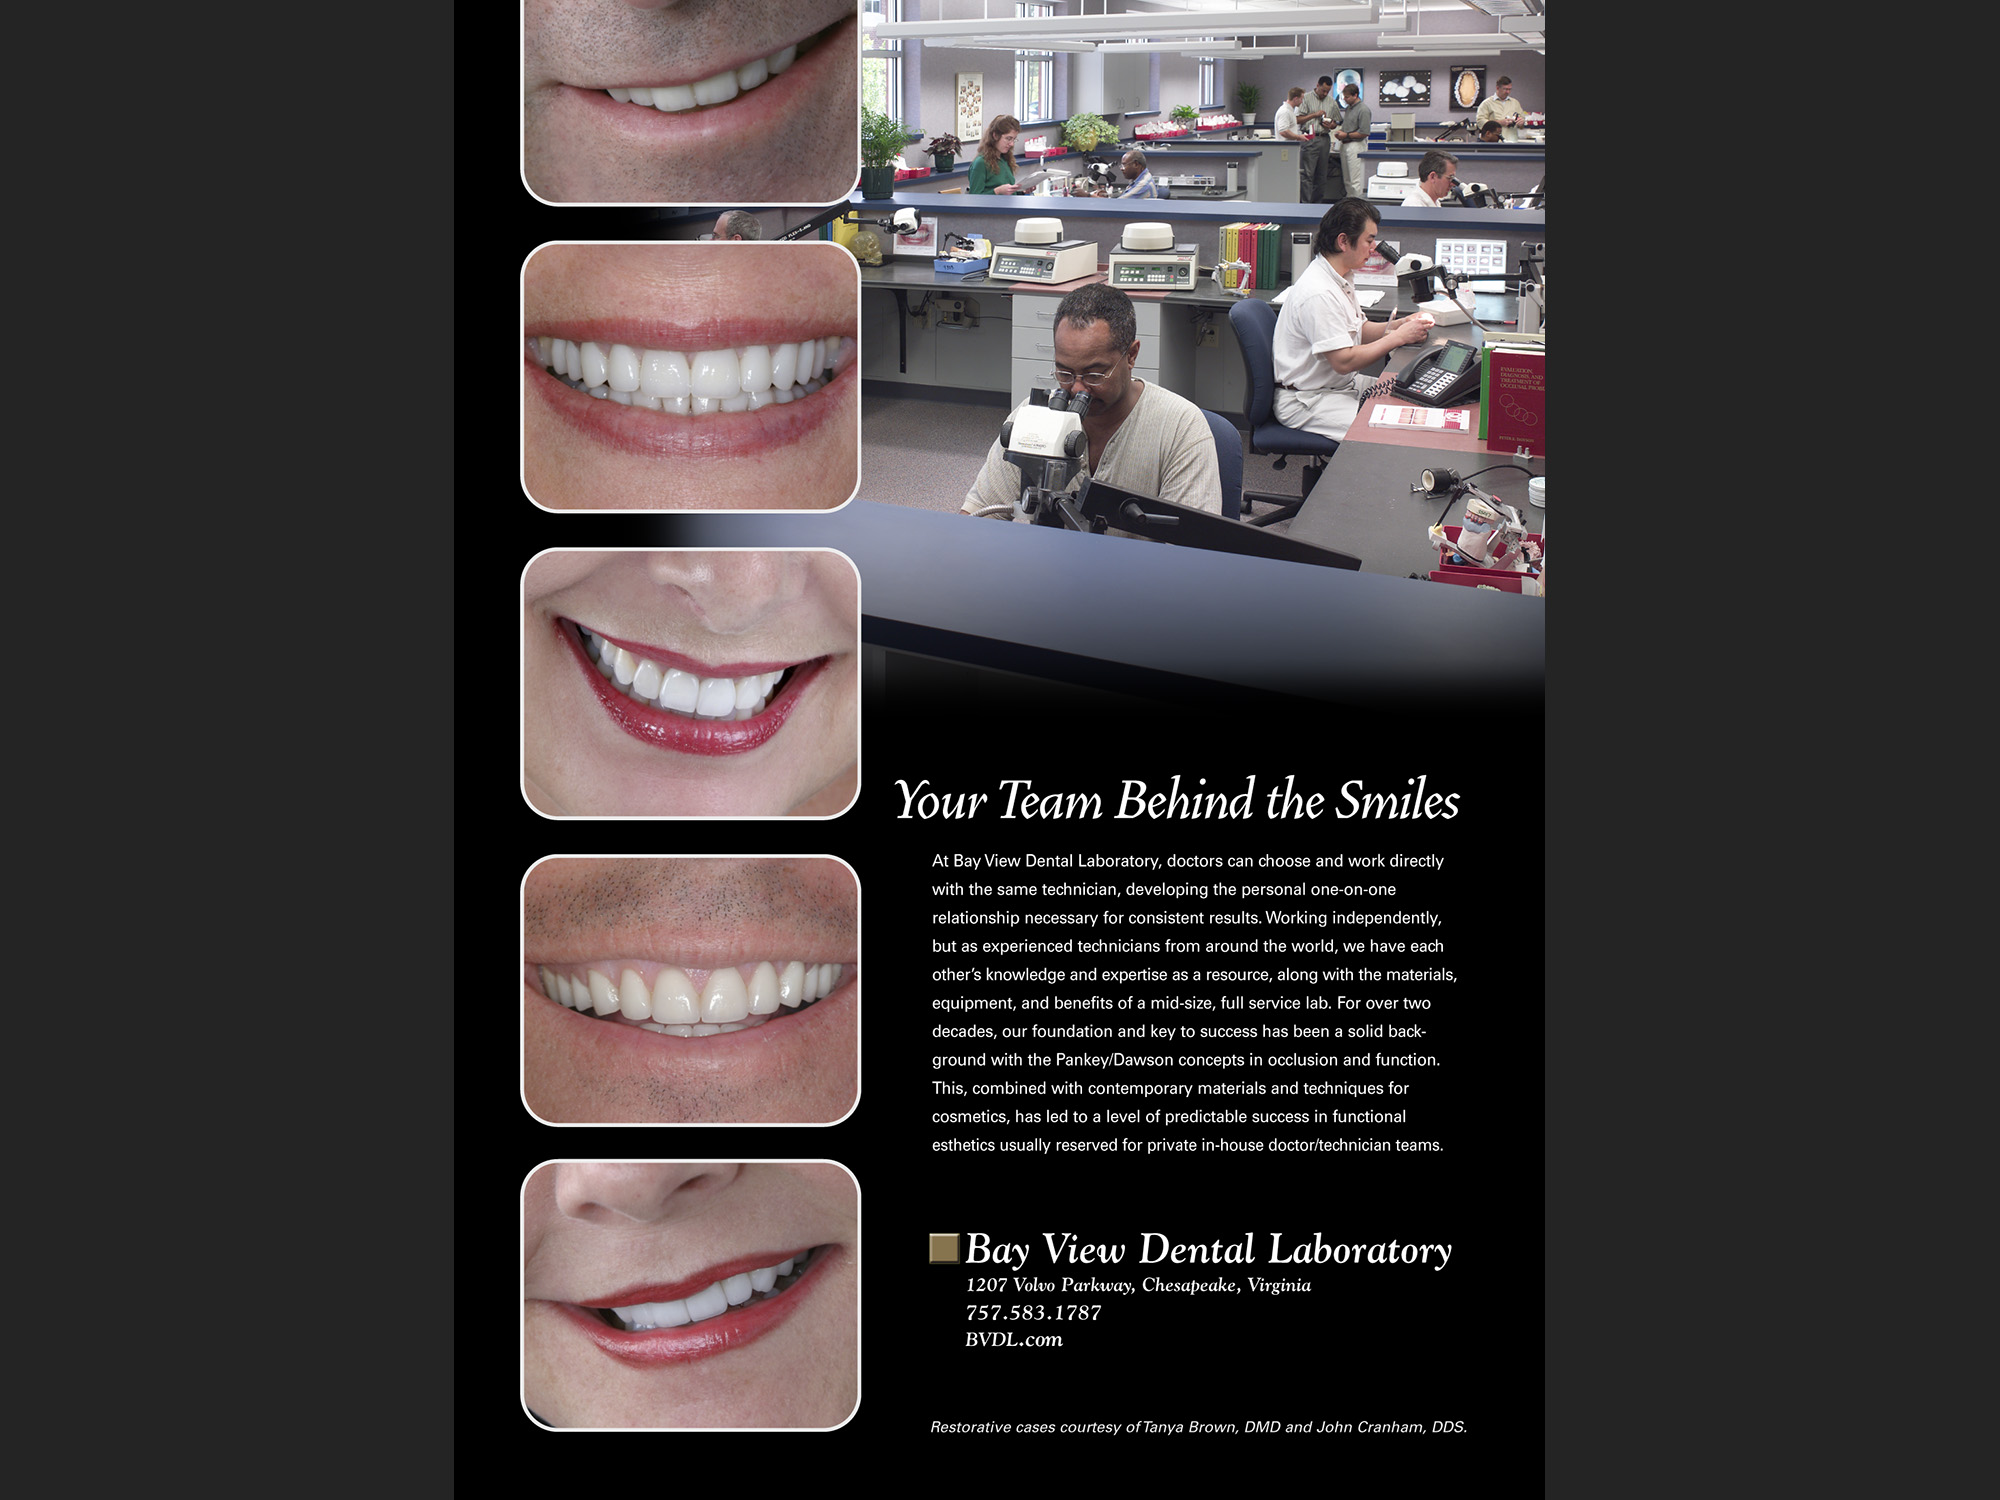 "Your Team Behind the Smiles:Bay View Dental Lab", 2004; full page for trade magazine.